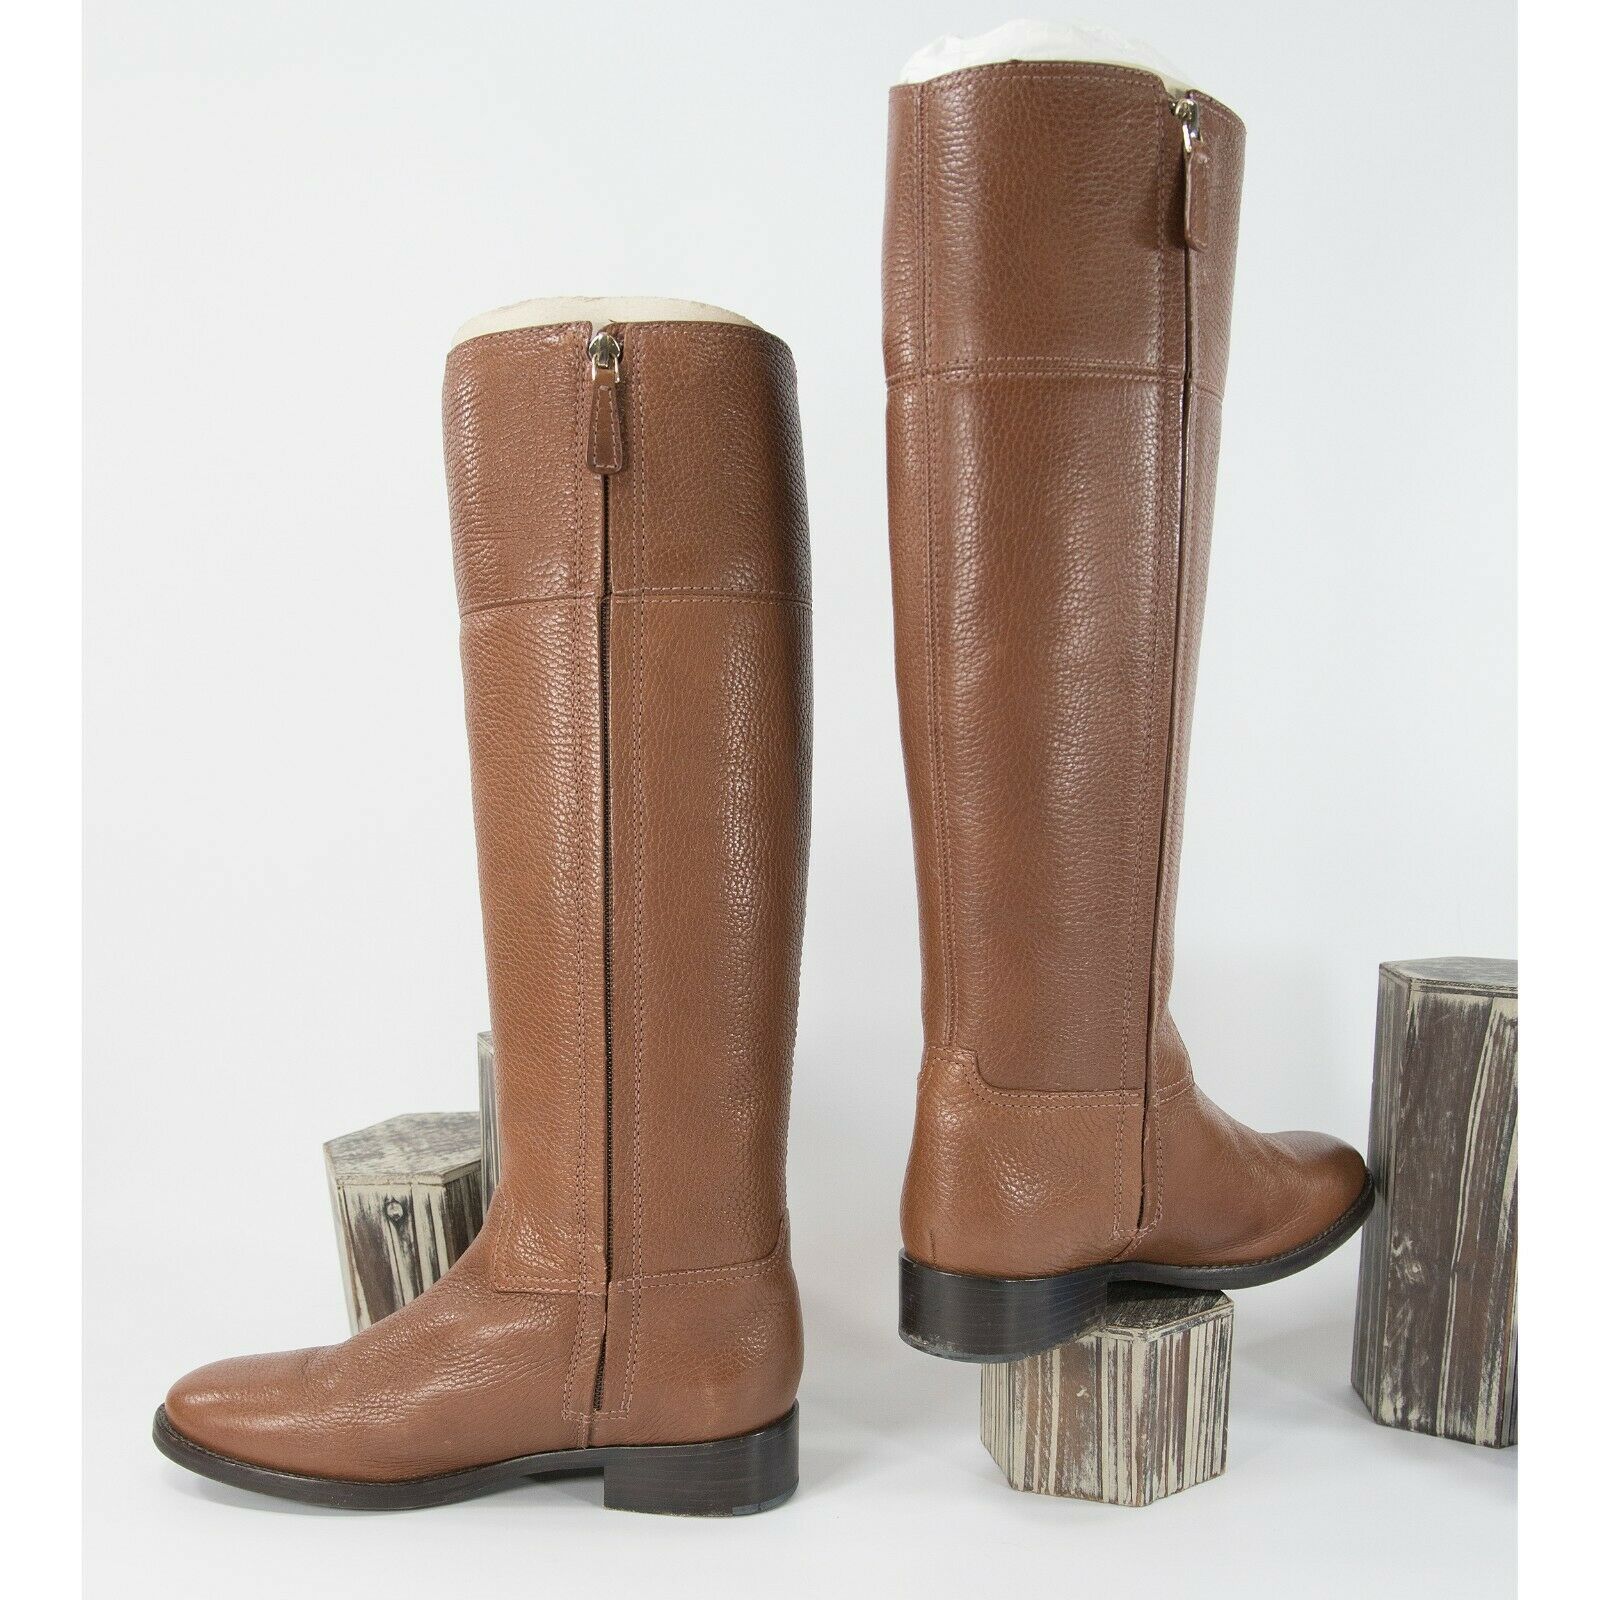 Tory Burch Rustic Brown Jolie Pebbled Leather Tall Riding Boots Sz 6 –  Uptown Cheapskate Austin